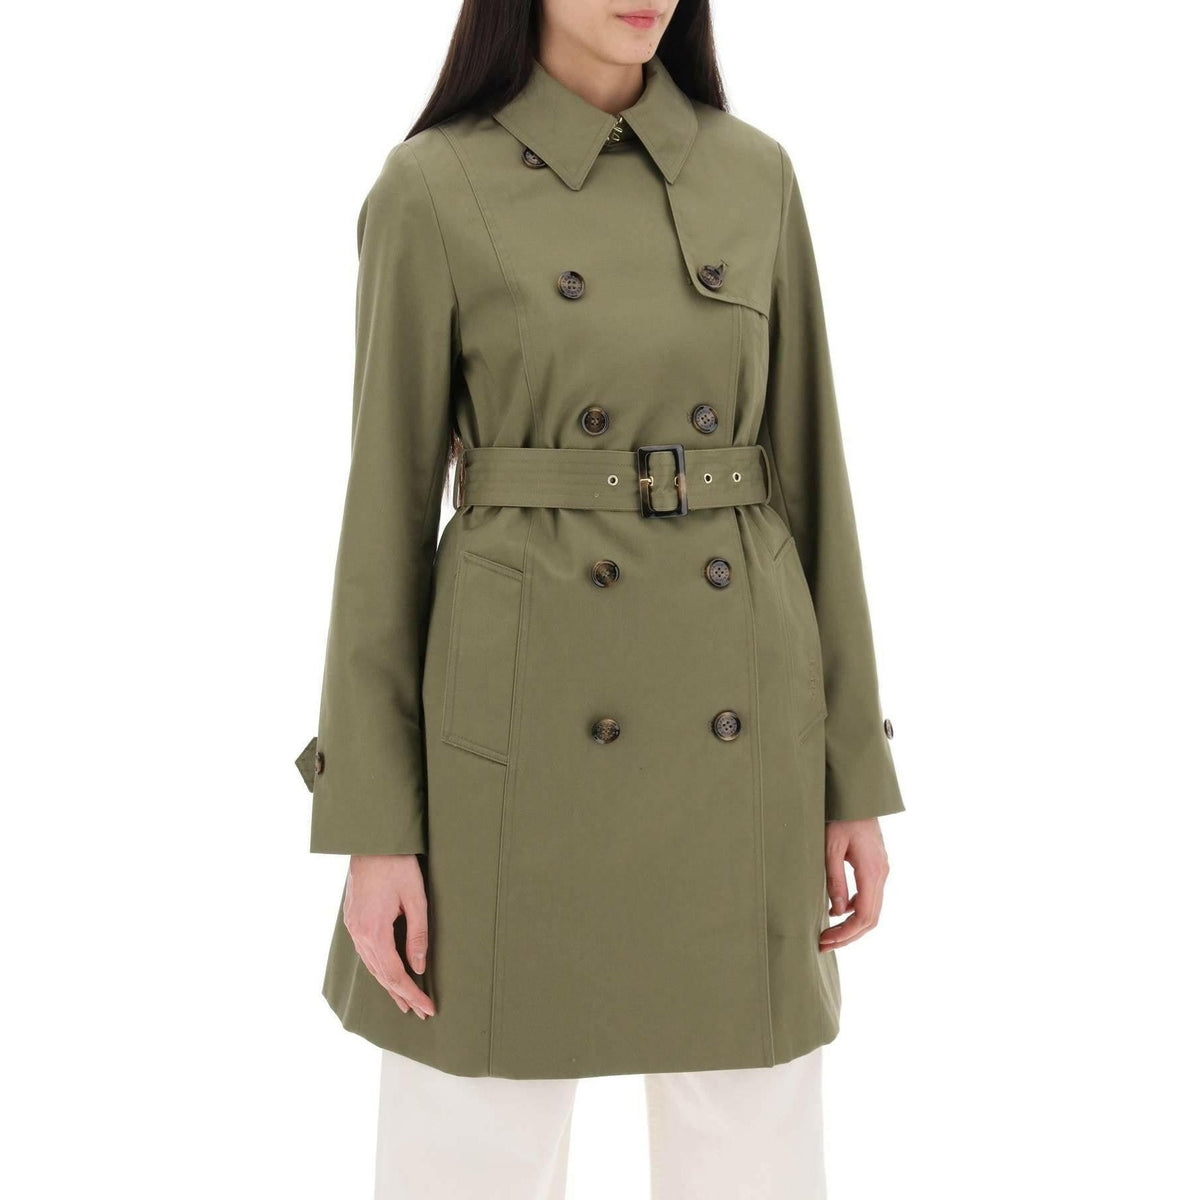 BARBOUR - Double-Breasted Trench Coat - JOHN JULIA